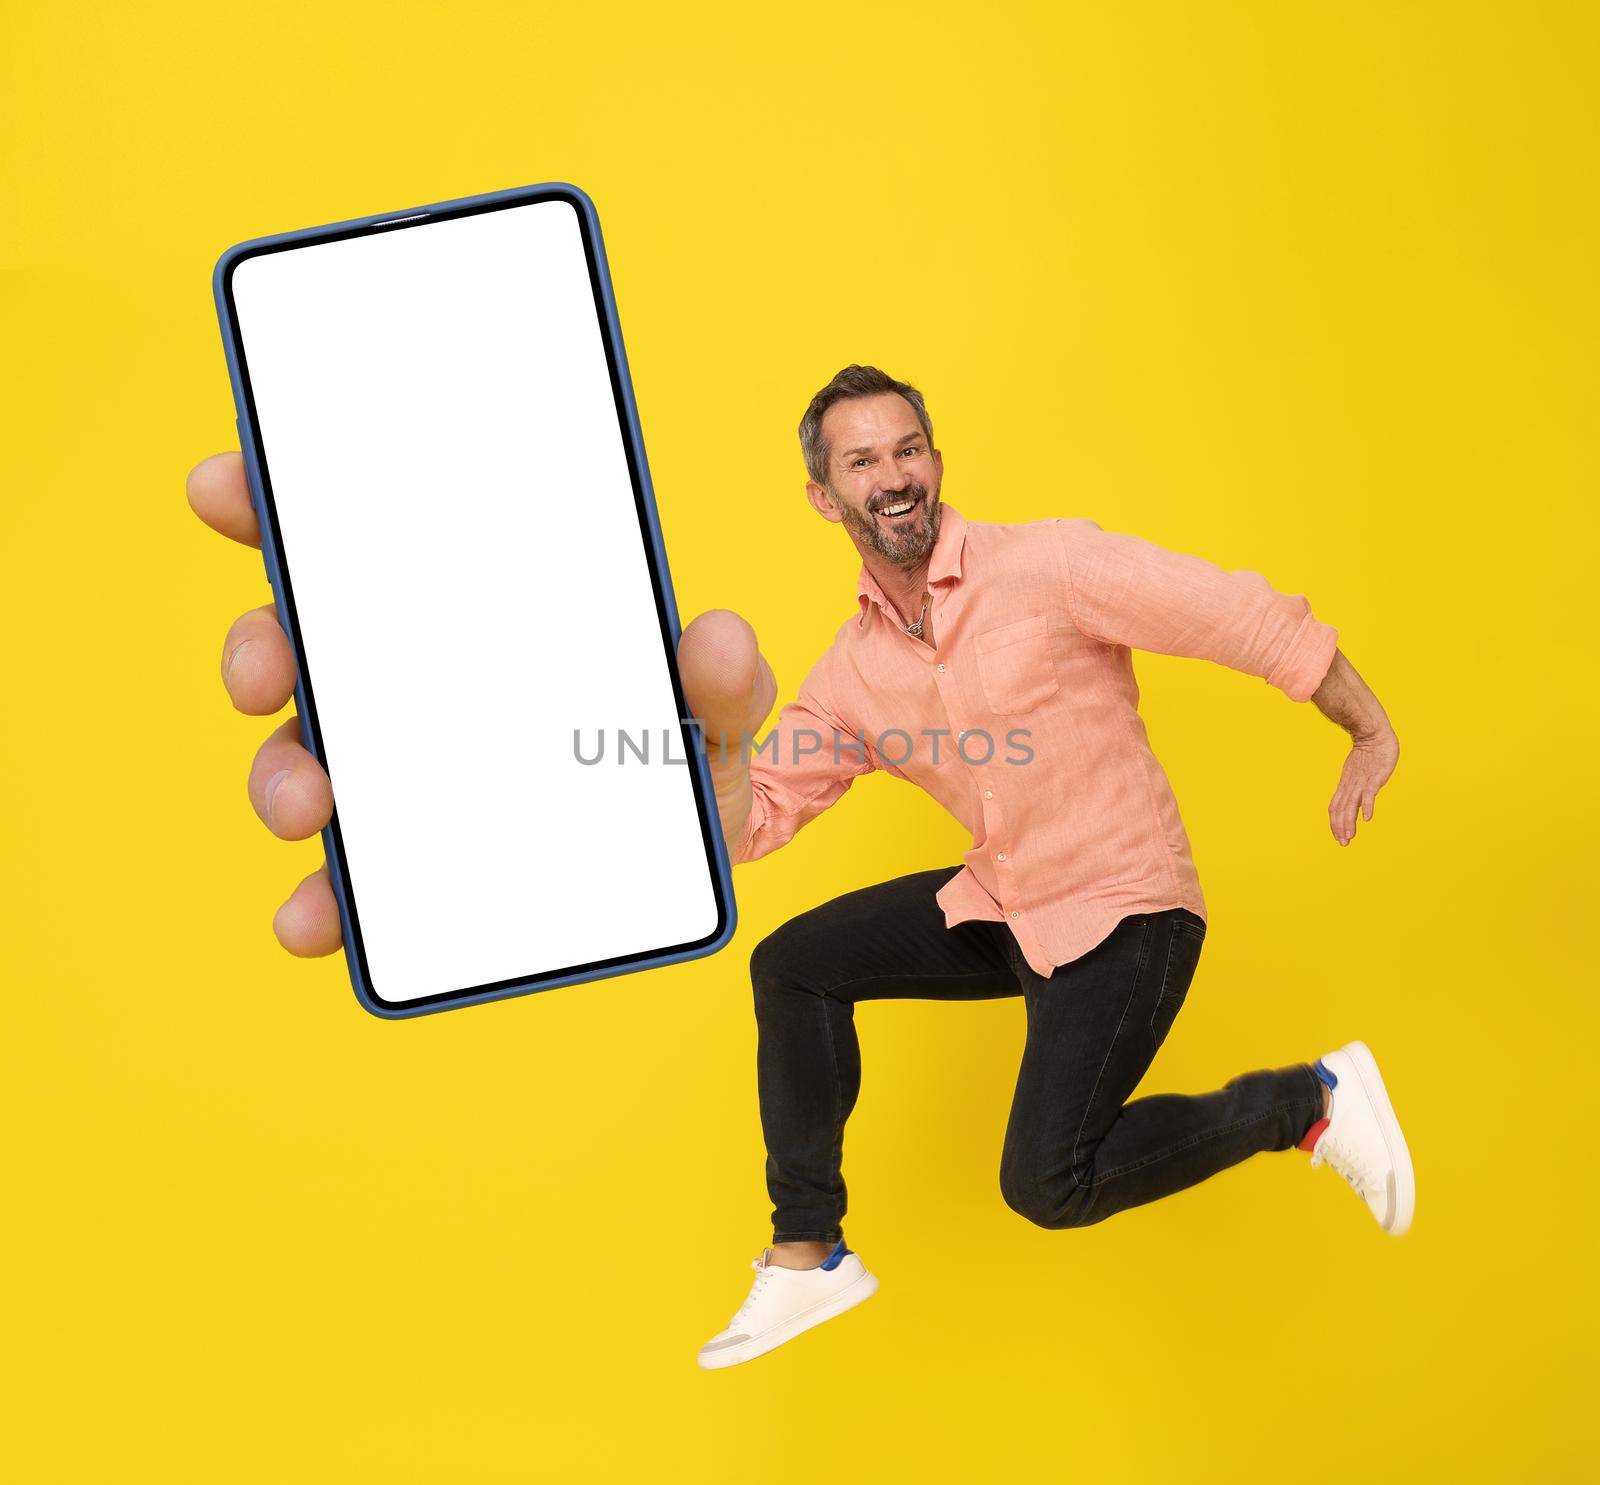 Mature grey haired man in high jump with smartphone in hand happy smiling on camera wearing peach shirt and black jeans isolated on yellow background. Mature fit man with smartphone.